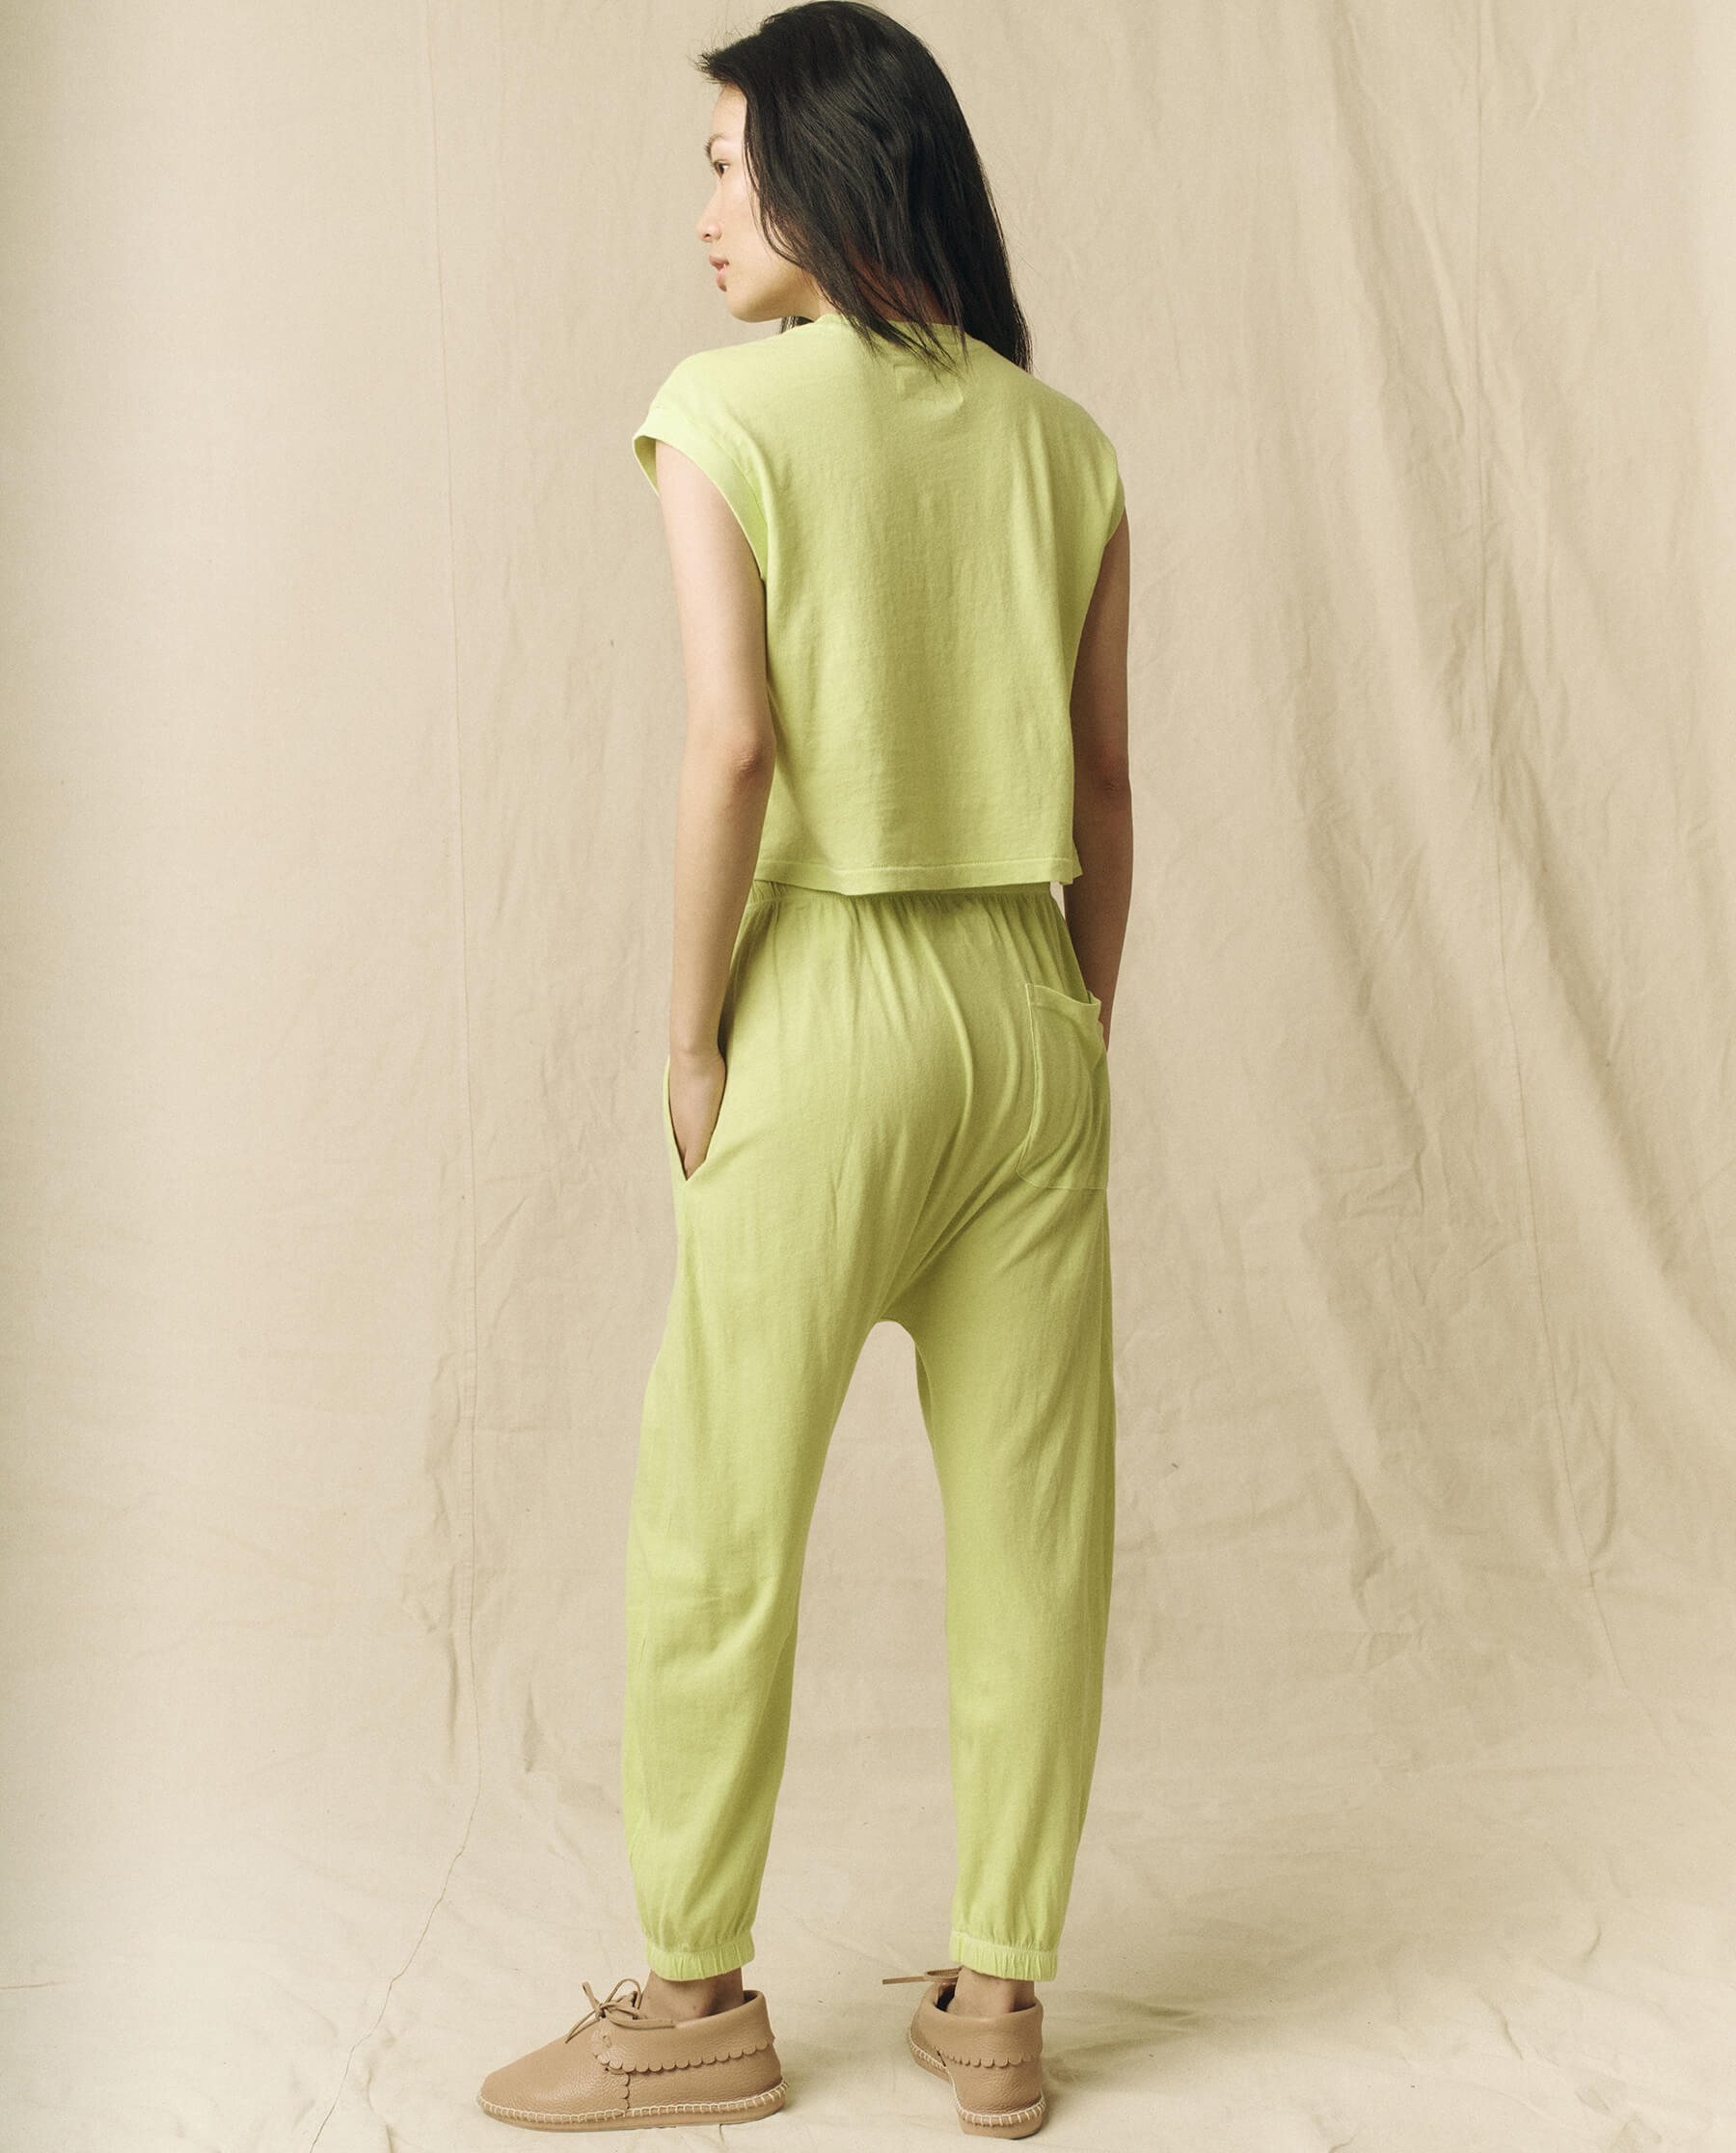 The Jersey Jogger Pant. -- Lime Zest SWEATPANTS THE GREAT. SU23 KNITS